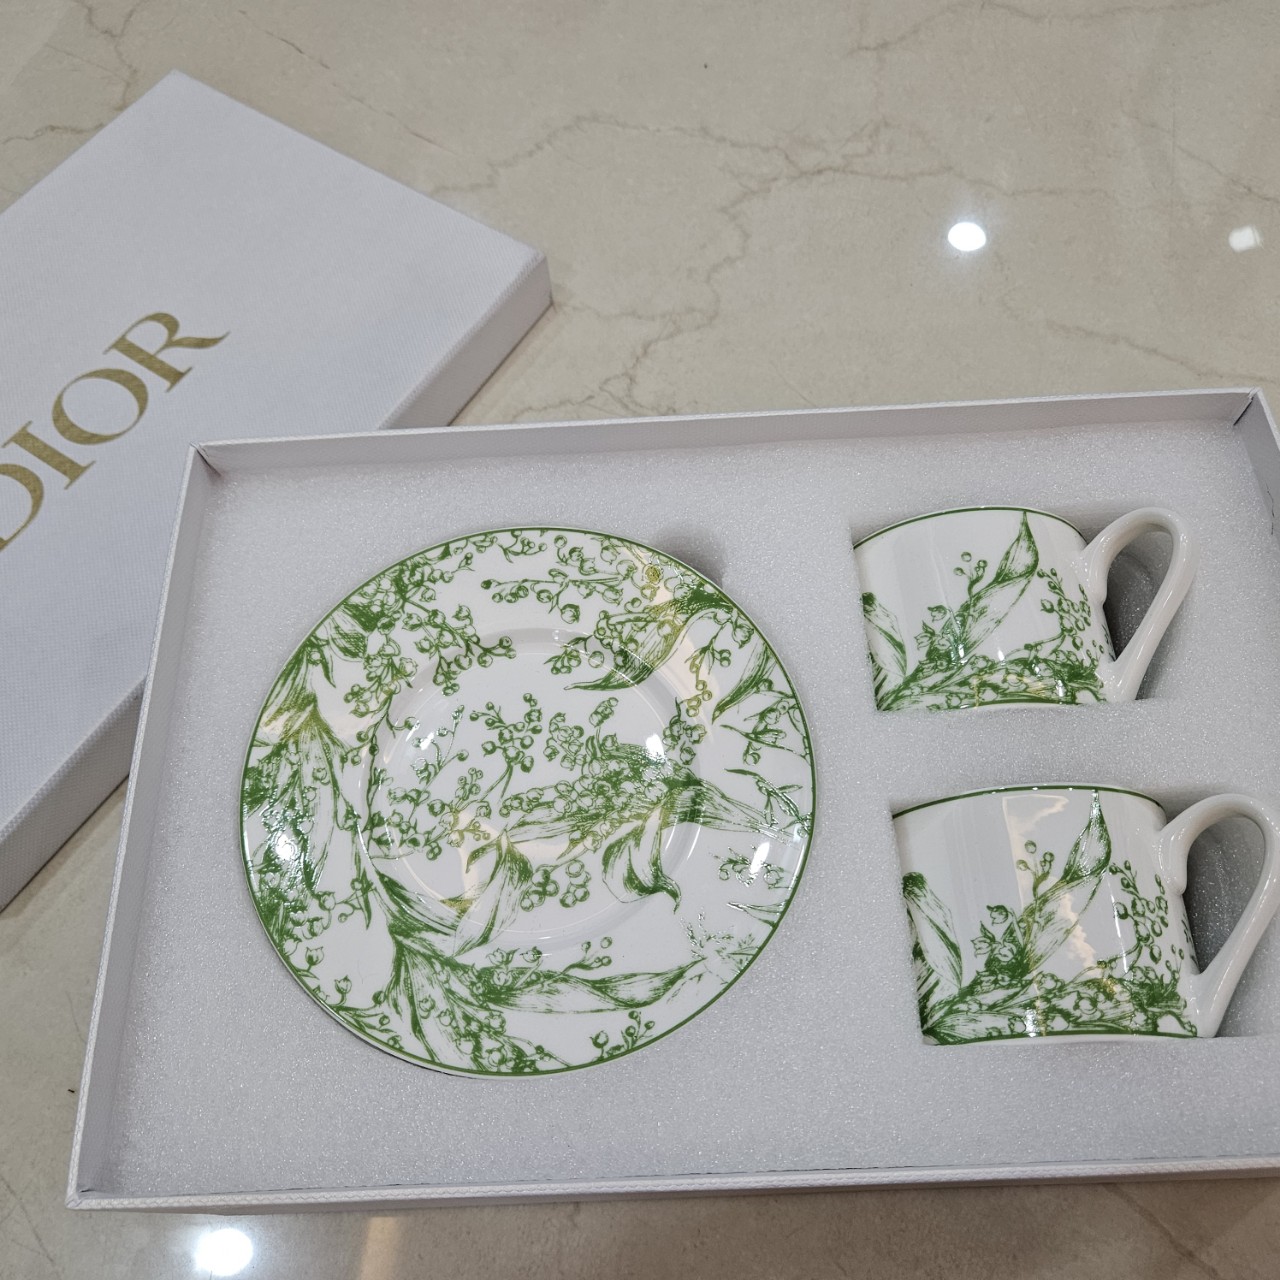 Dior Celebrates Lily of the Valley With New Homewares Collection  WWD